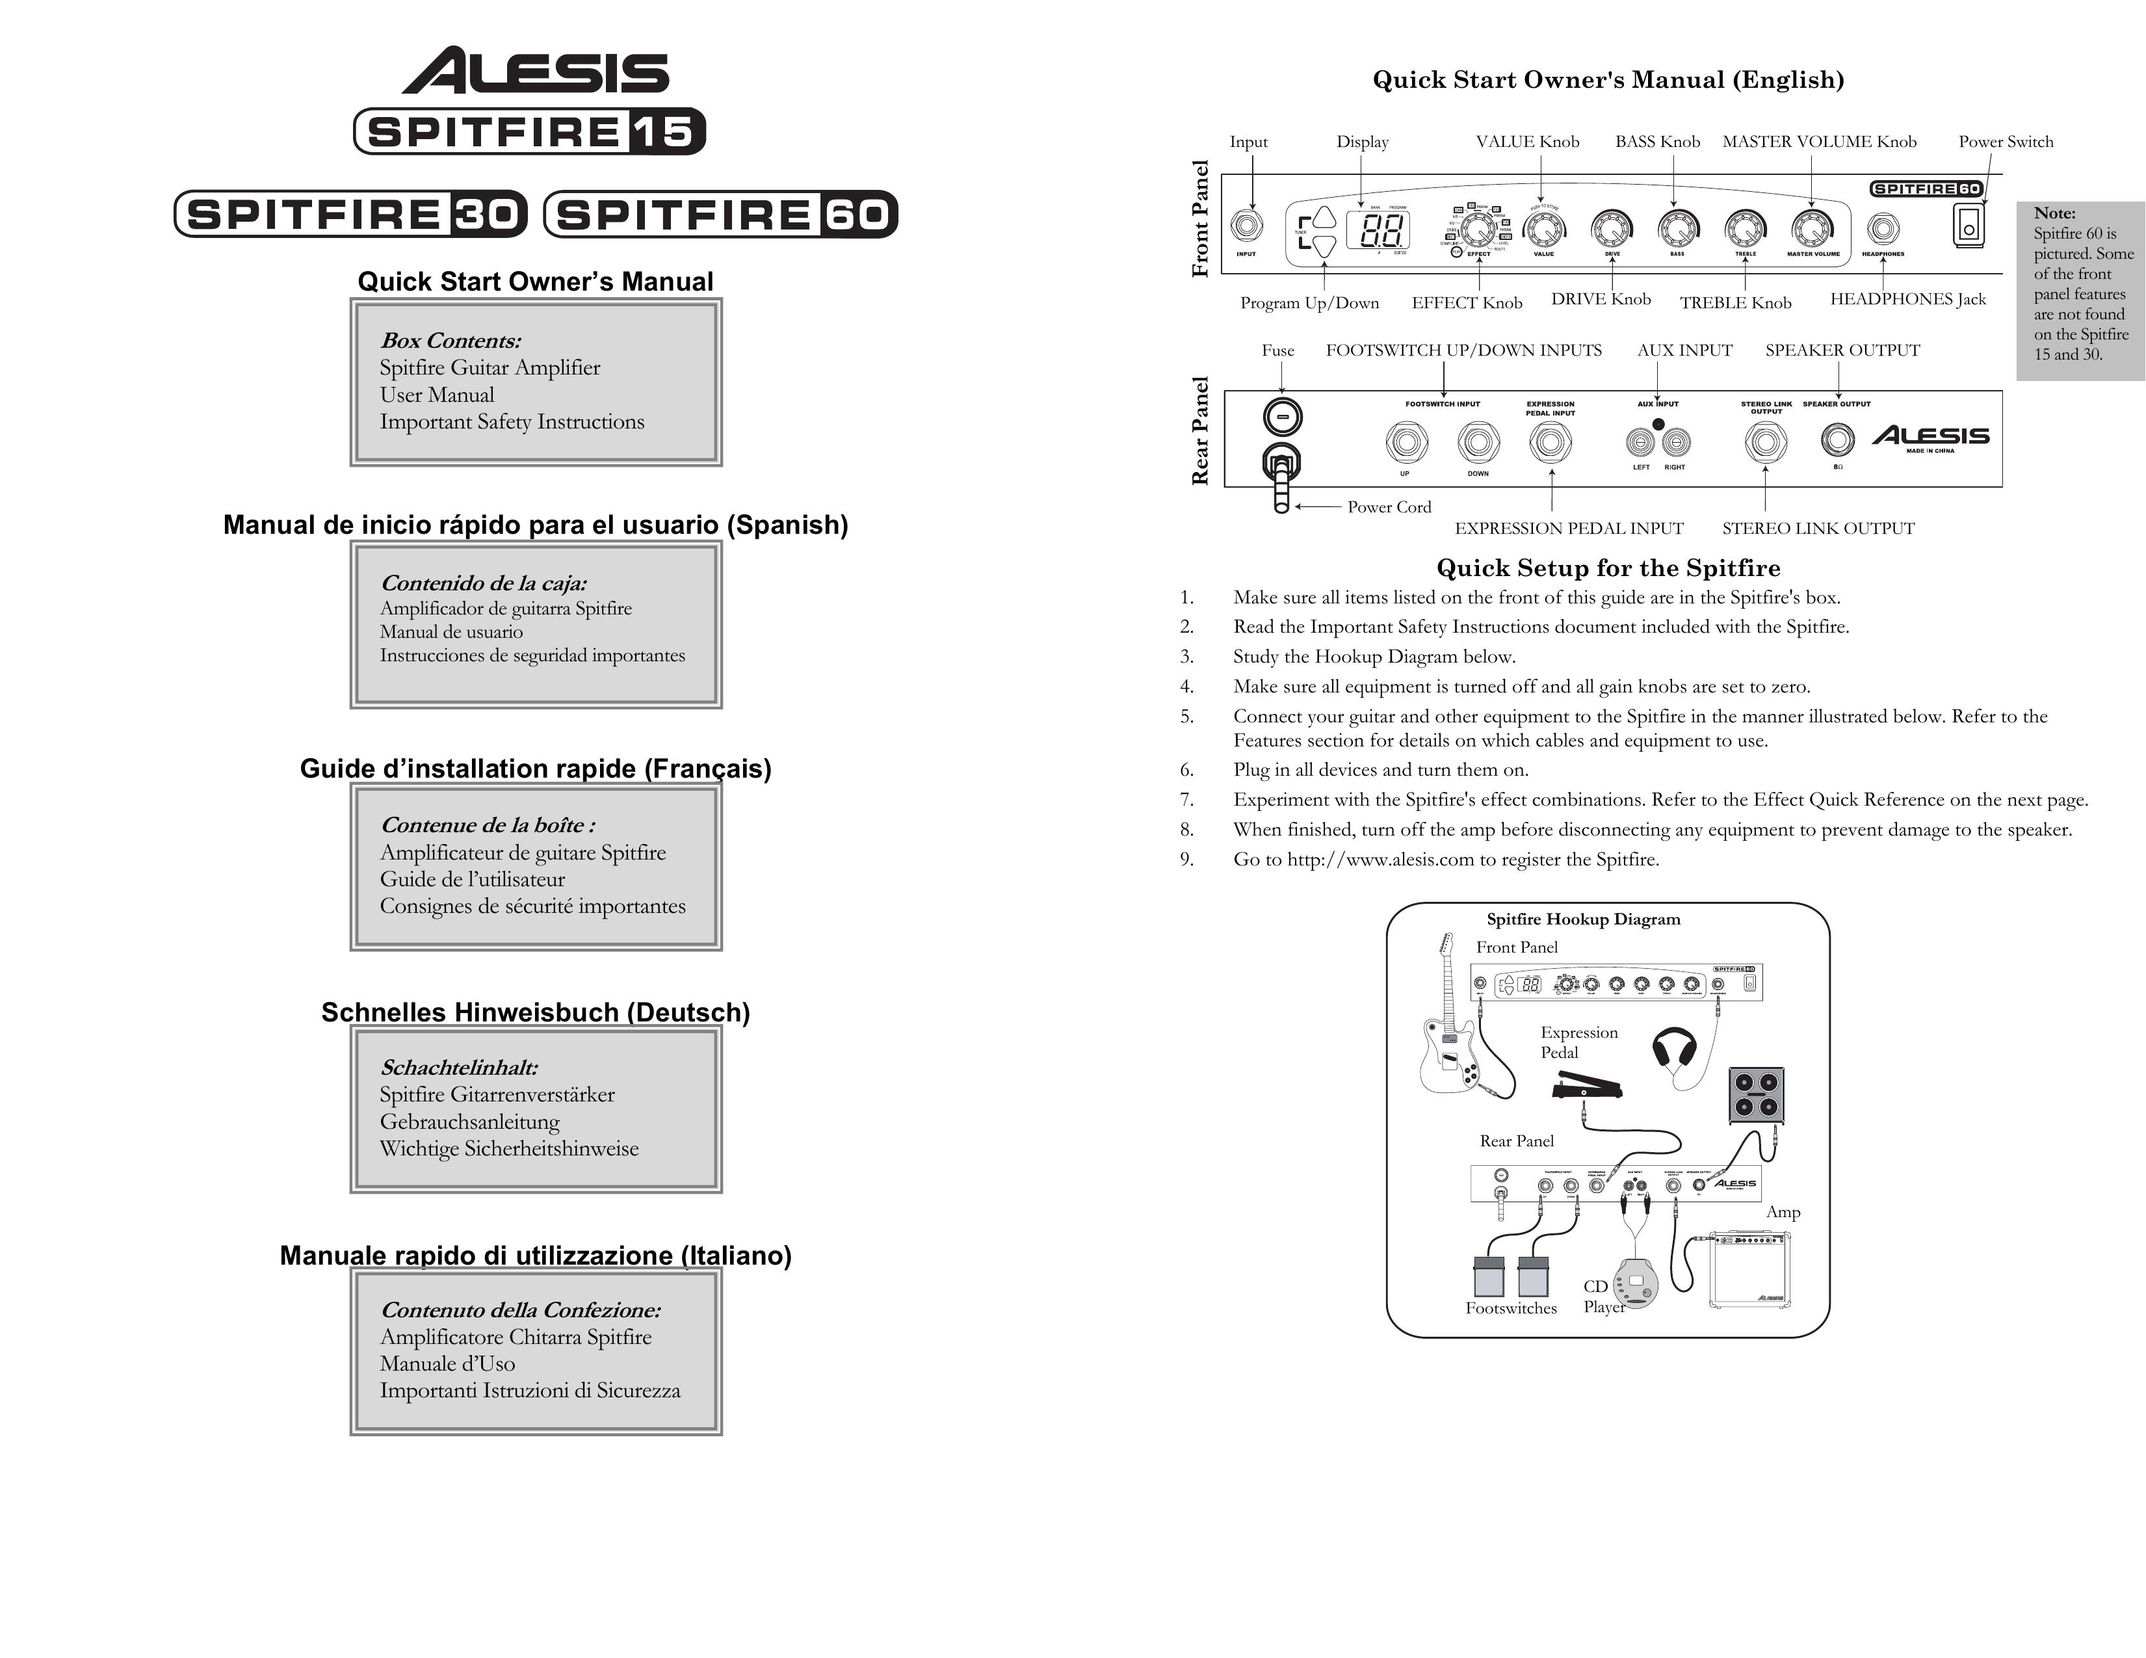 Alesis Spitfire 15 Stereo Amplifier User Manual